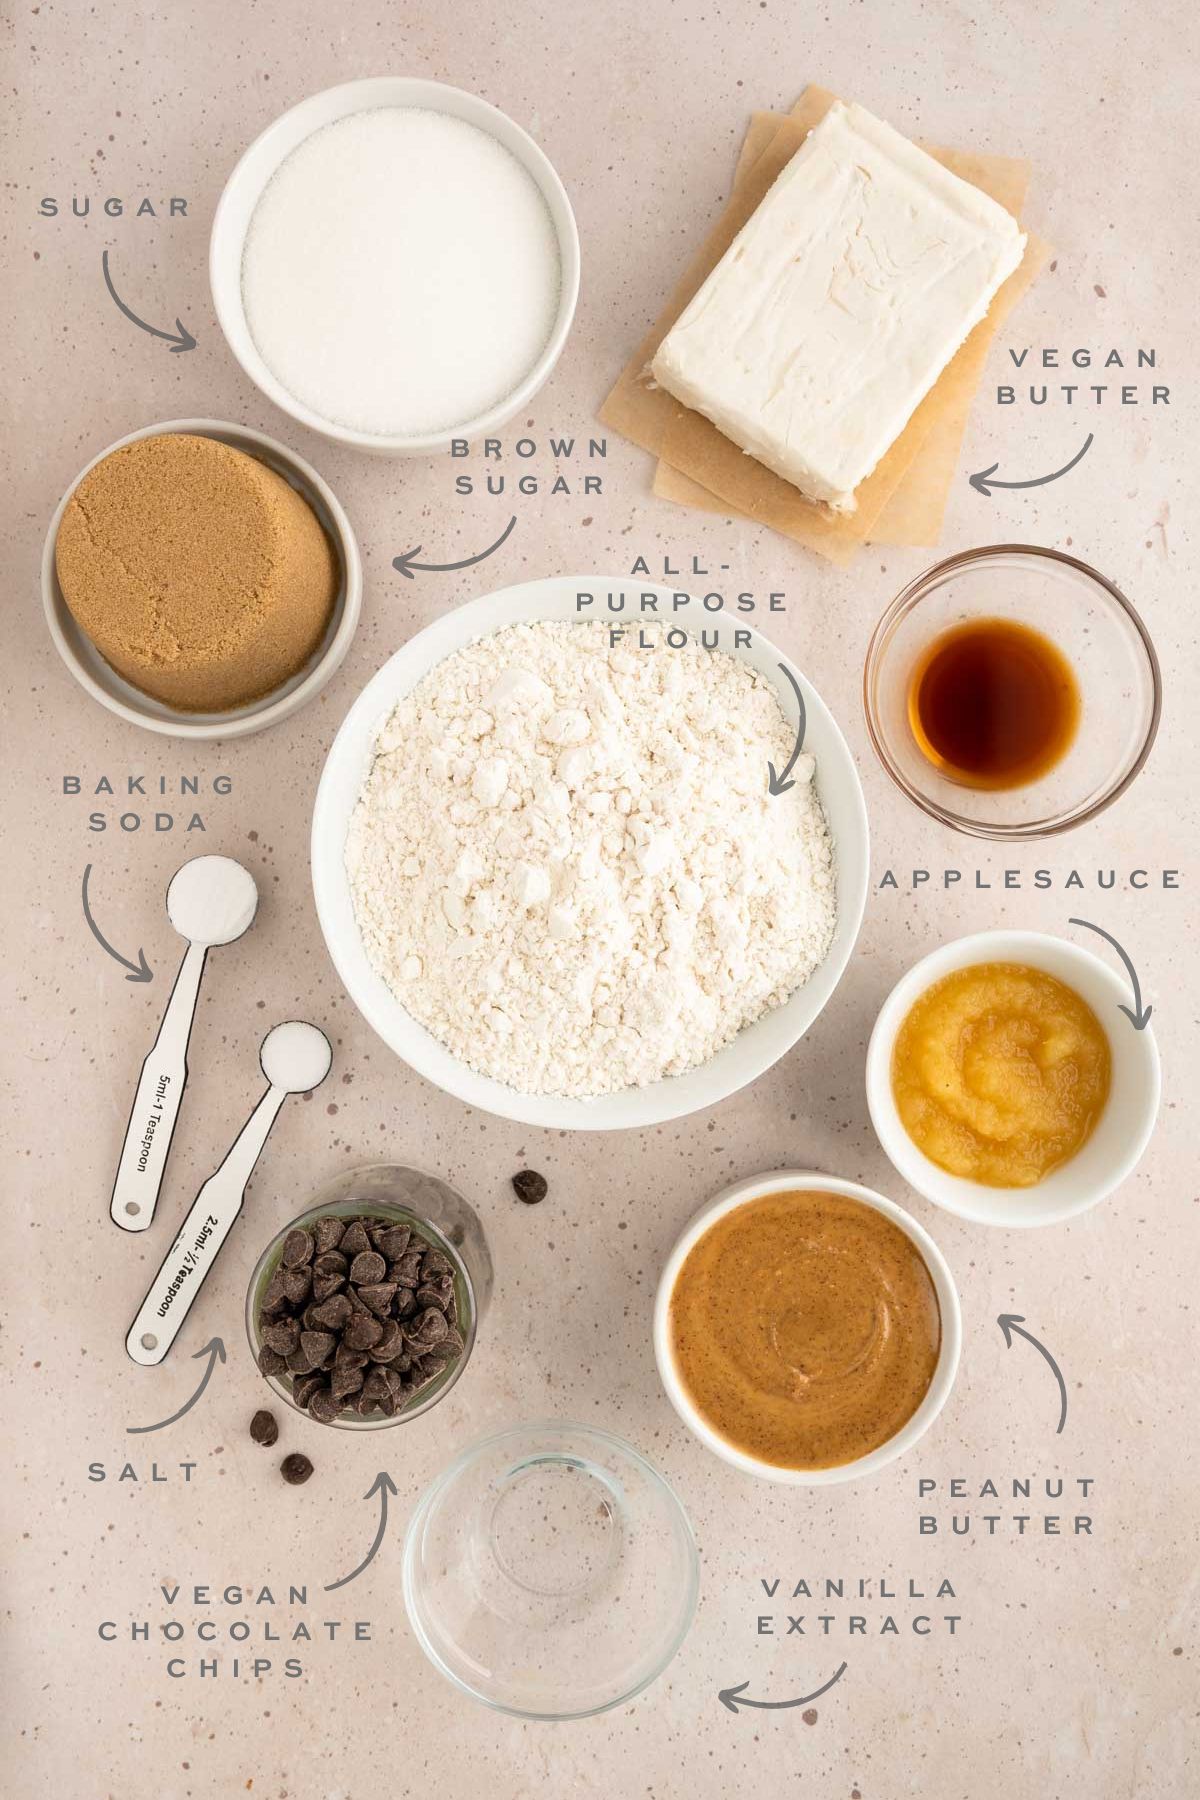 Key ingredients for chocolate-covered cookie dough balls.